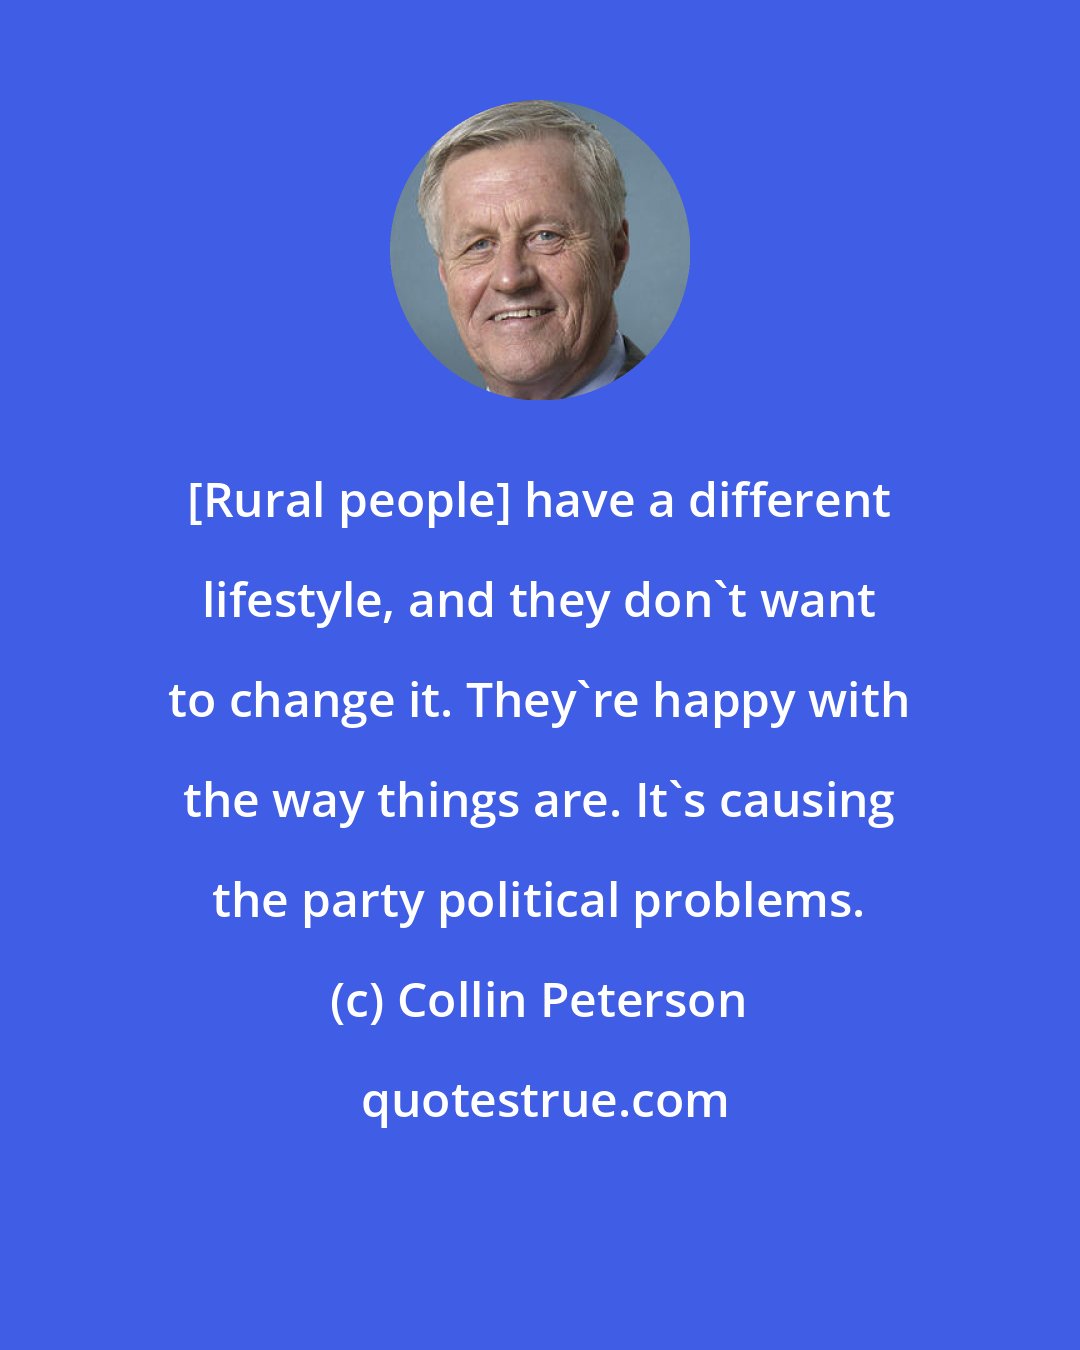 Collin Peterson: [Rural people] have a different lifestyle, and they don't want to change it. They're happy with the way things are. It's causing the party political problems.